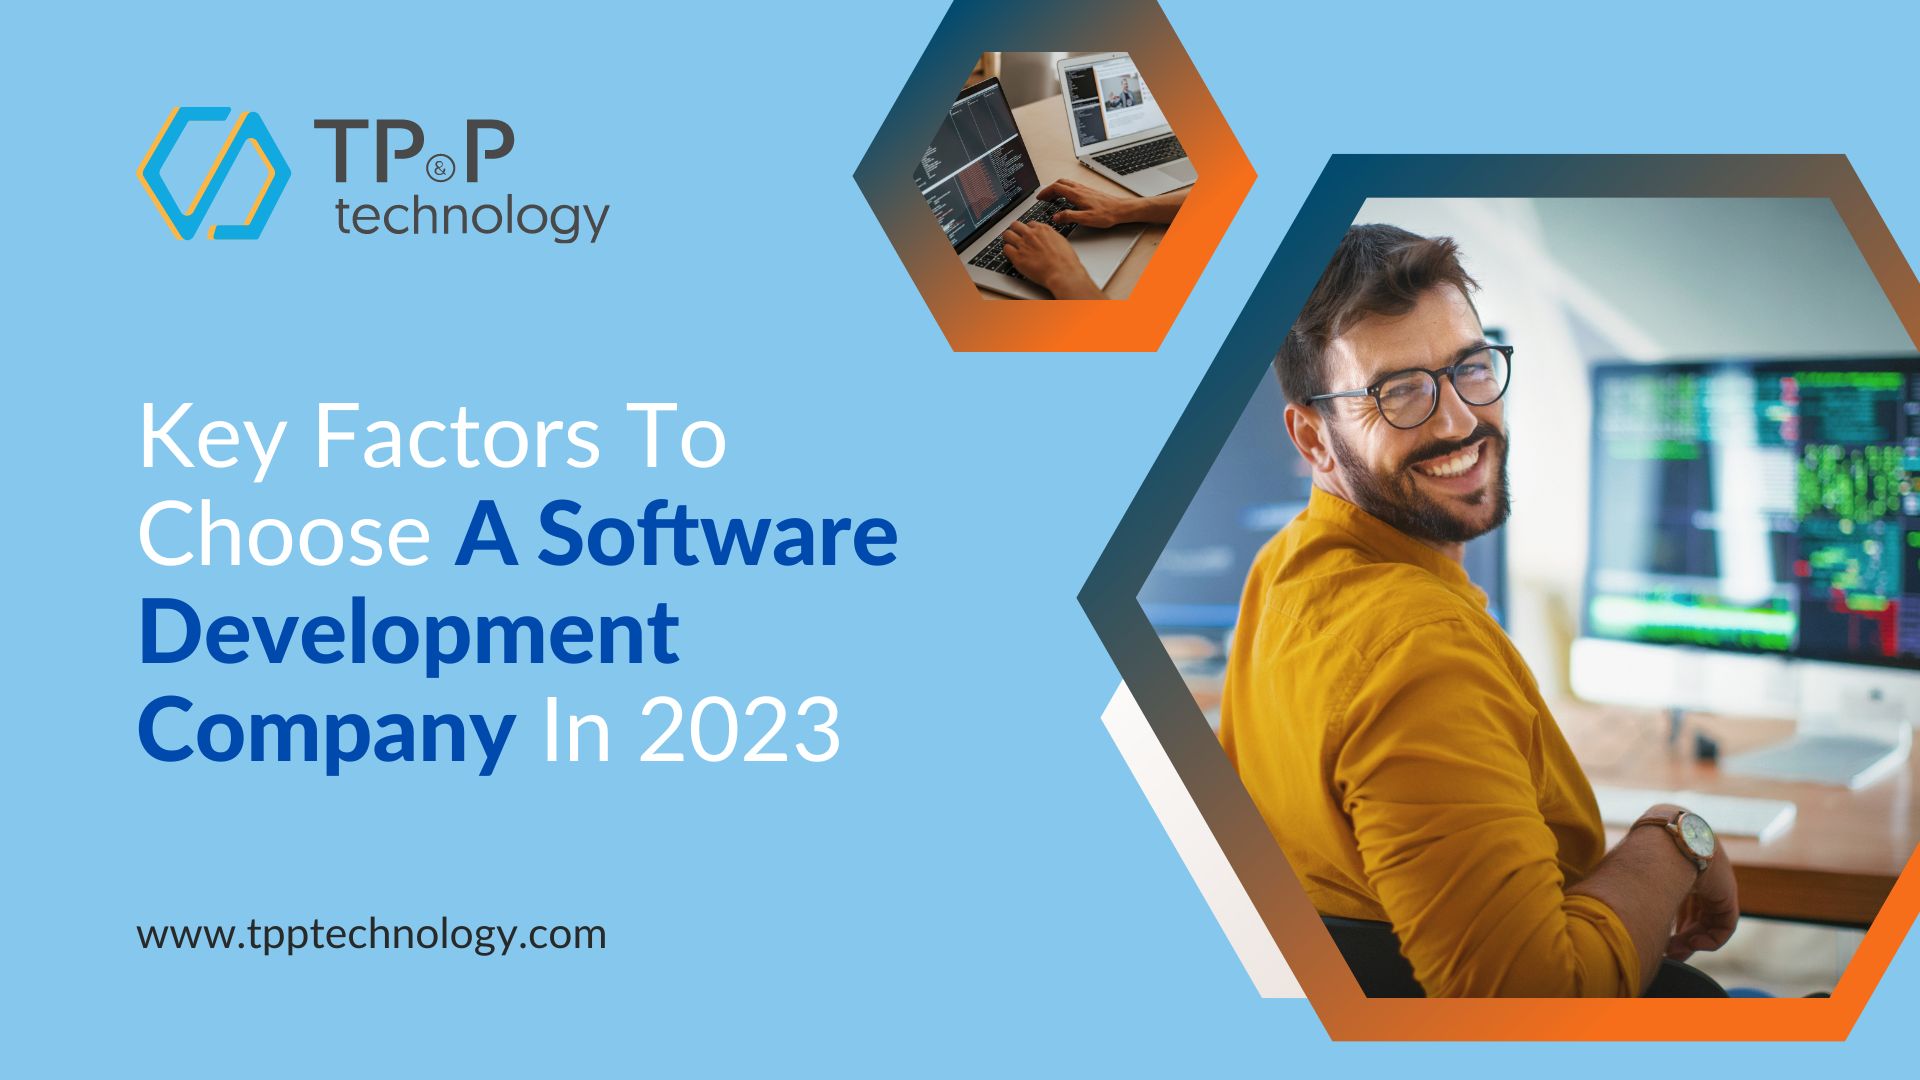 Key Factors To Choose A Software Development Company In 2023